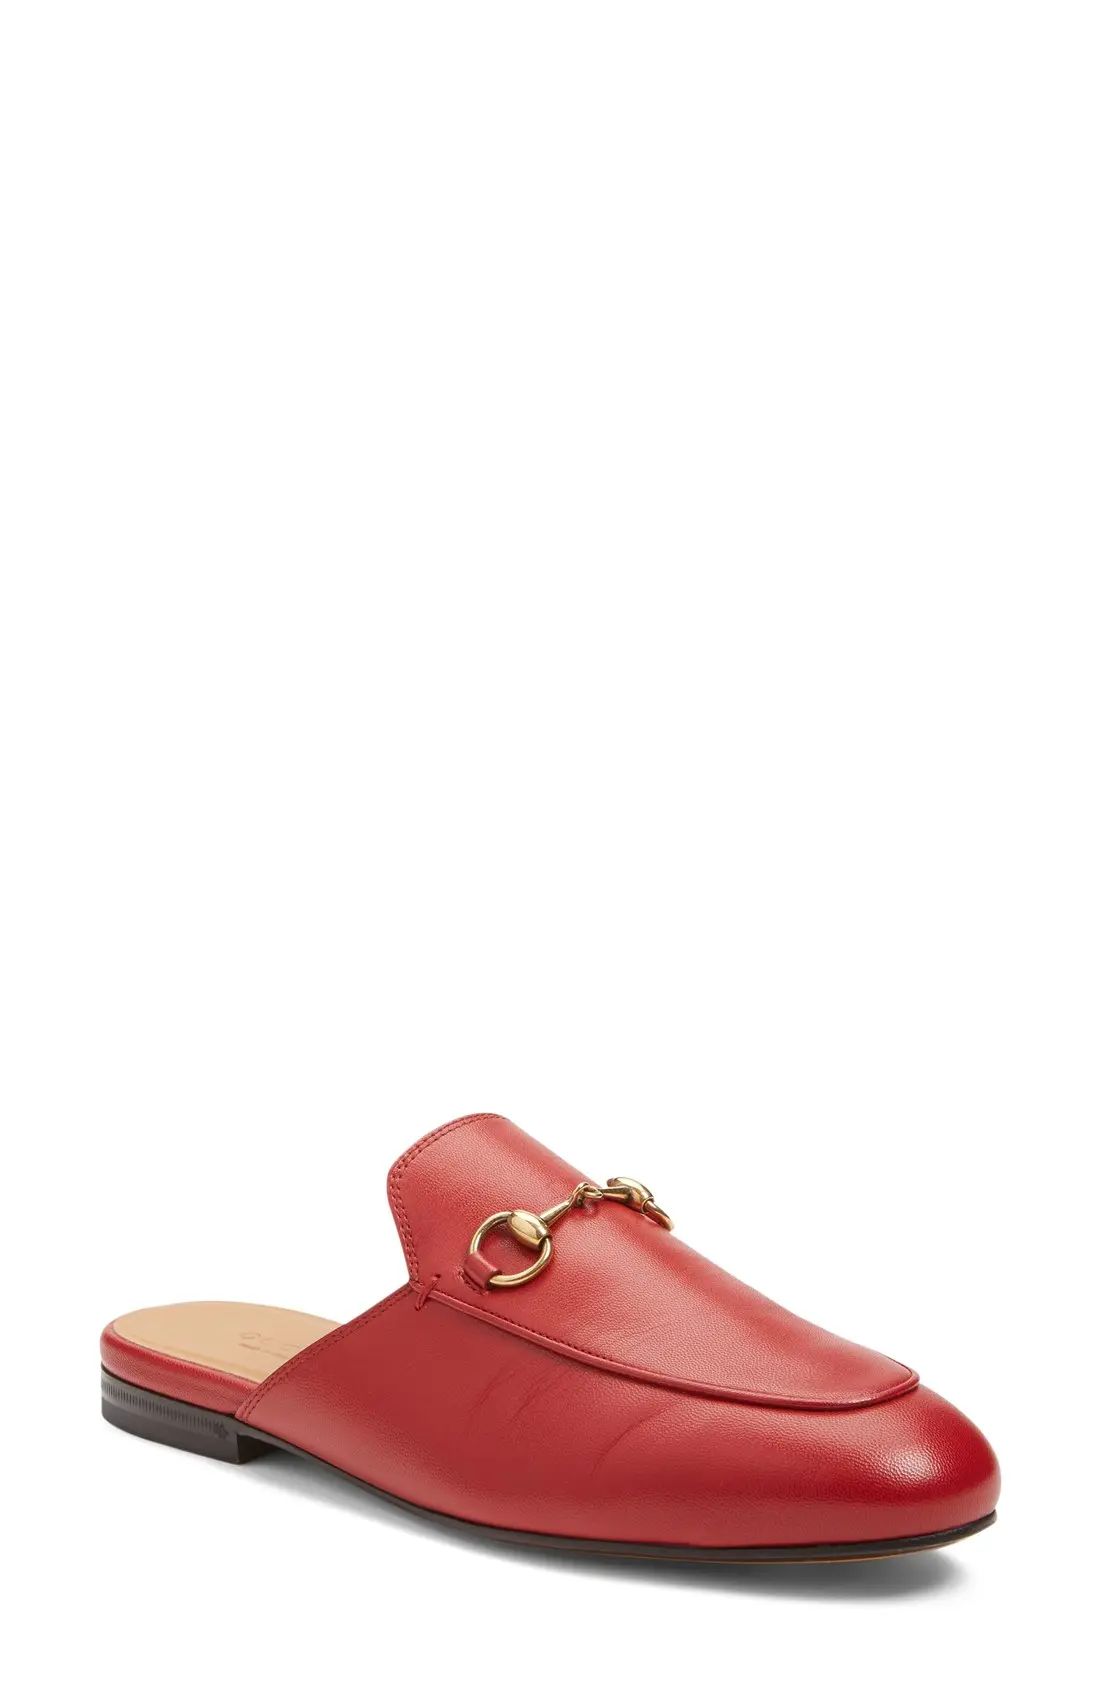 Gucci Princetown Loafer Mule in Red Leather at Nordstrom, Size 4.5Us | Nordstrom